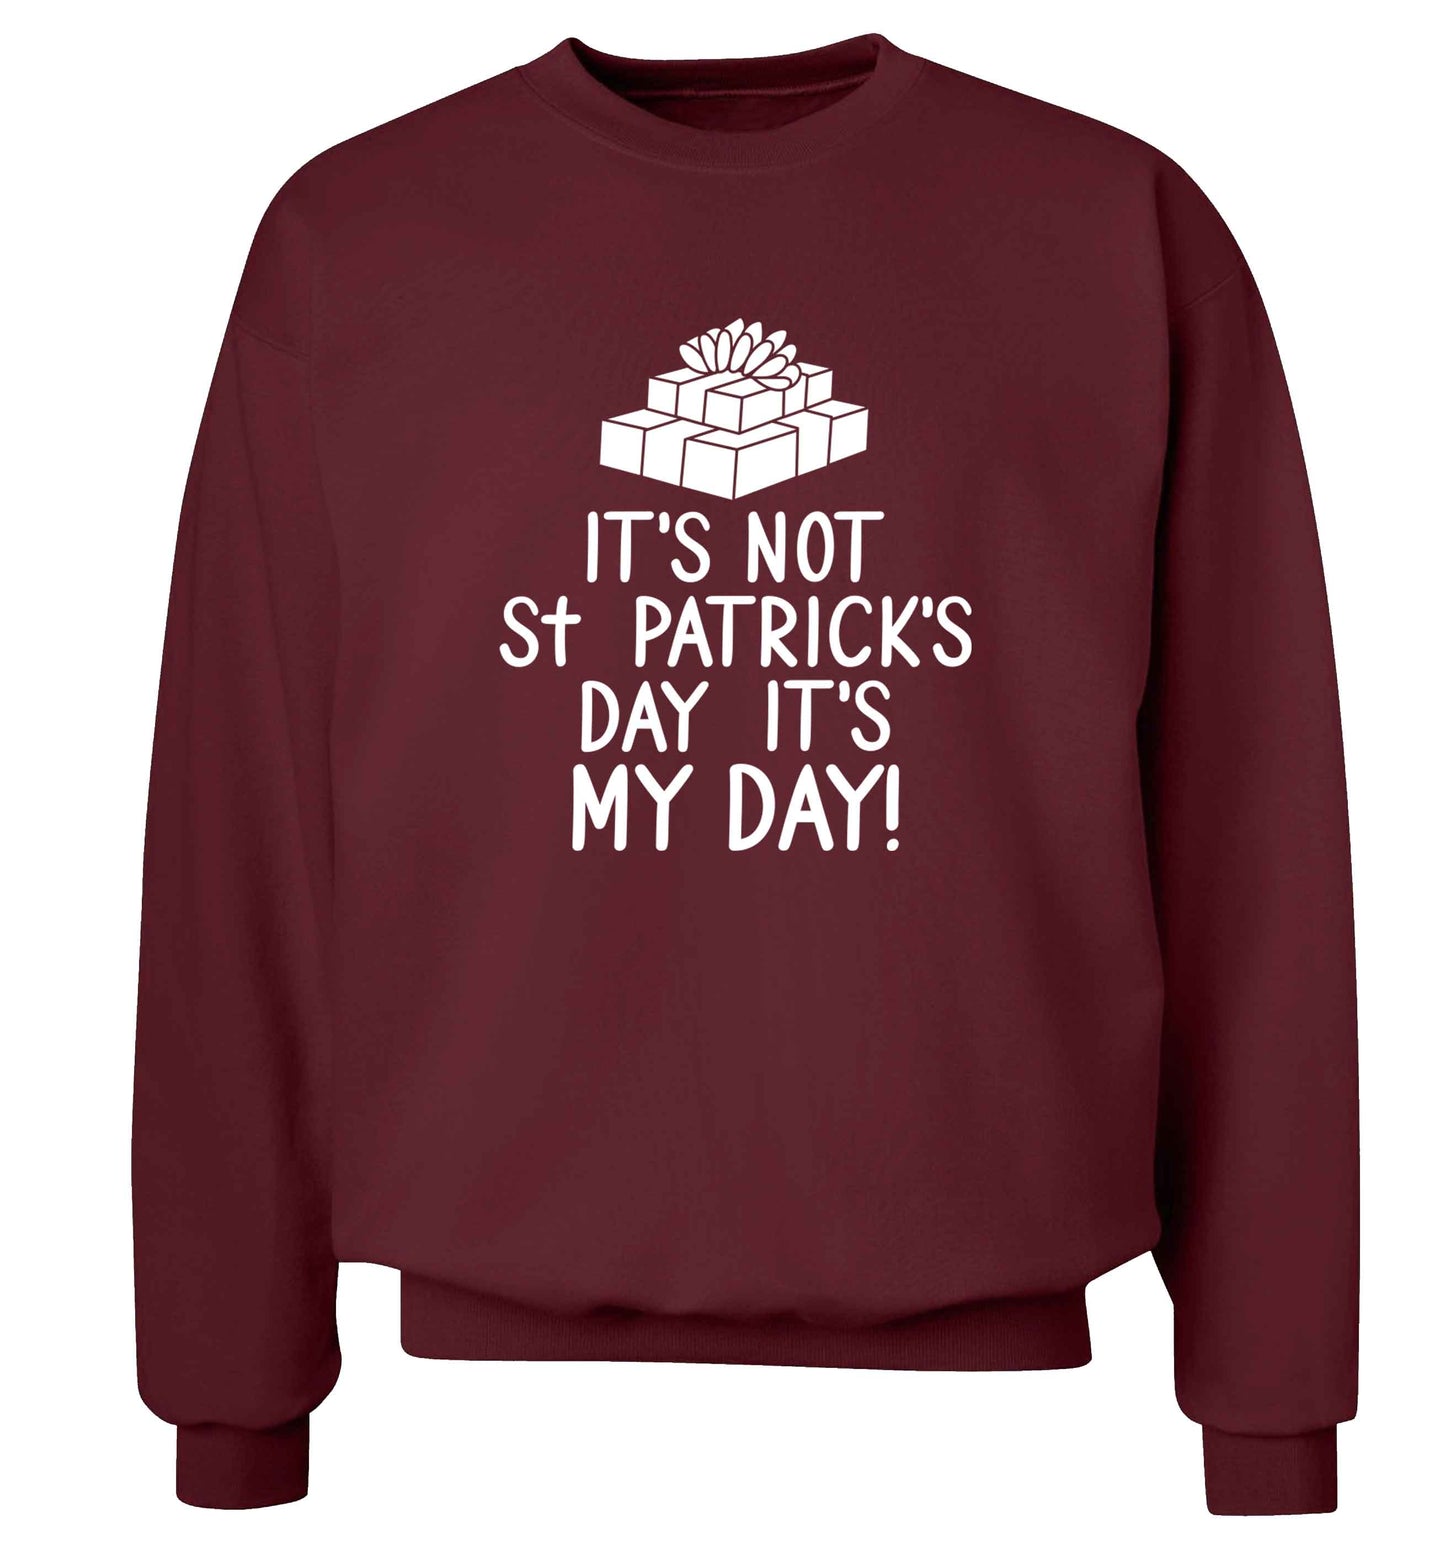 Funny gifts for your mum on mother's dayor her birthday! It's not St Patricks day it's my day adult's unisex maroon sweater 2XL